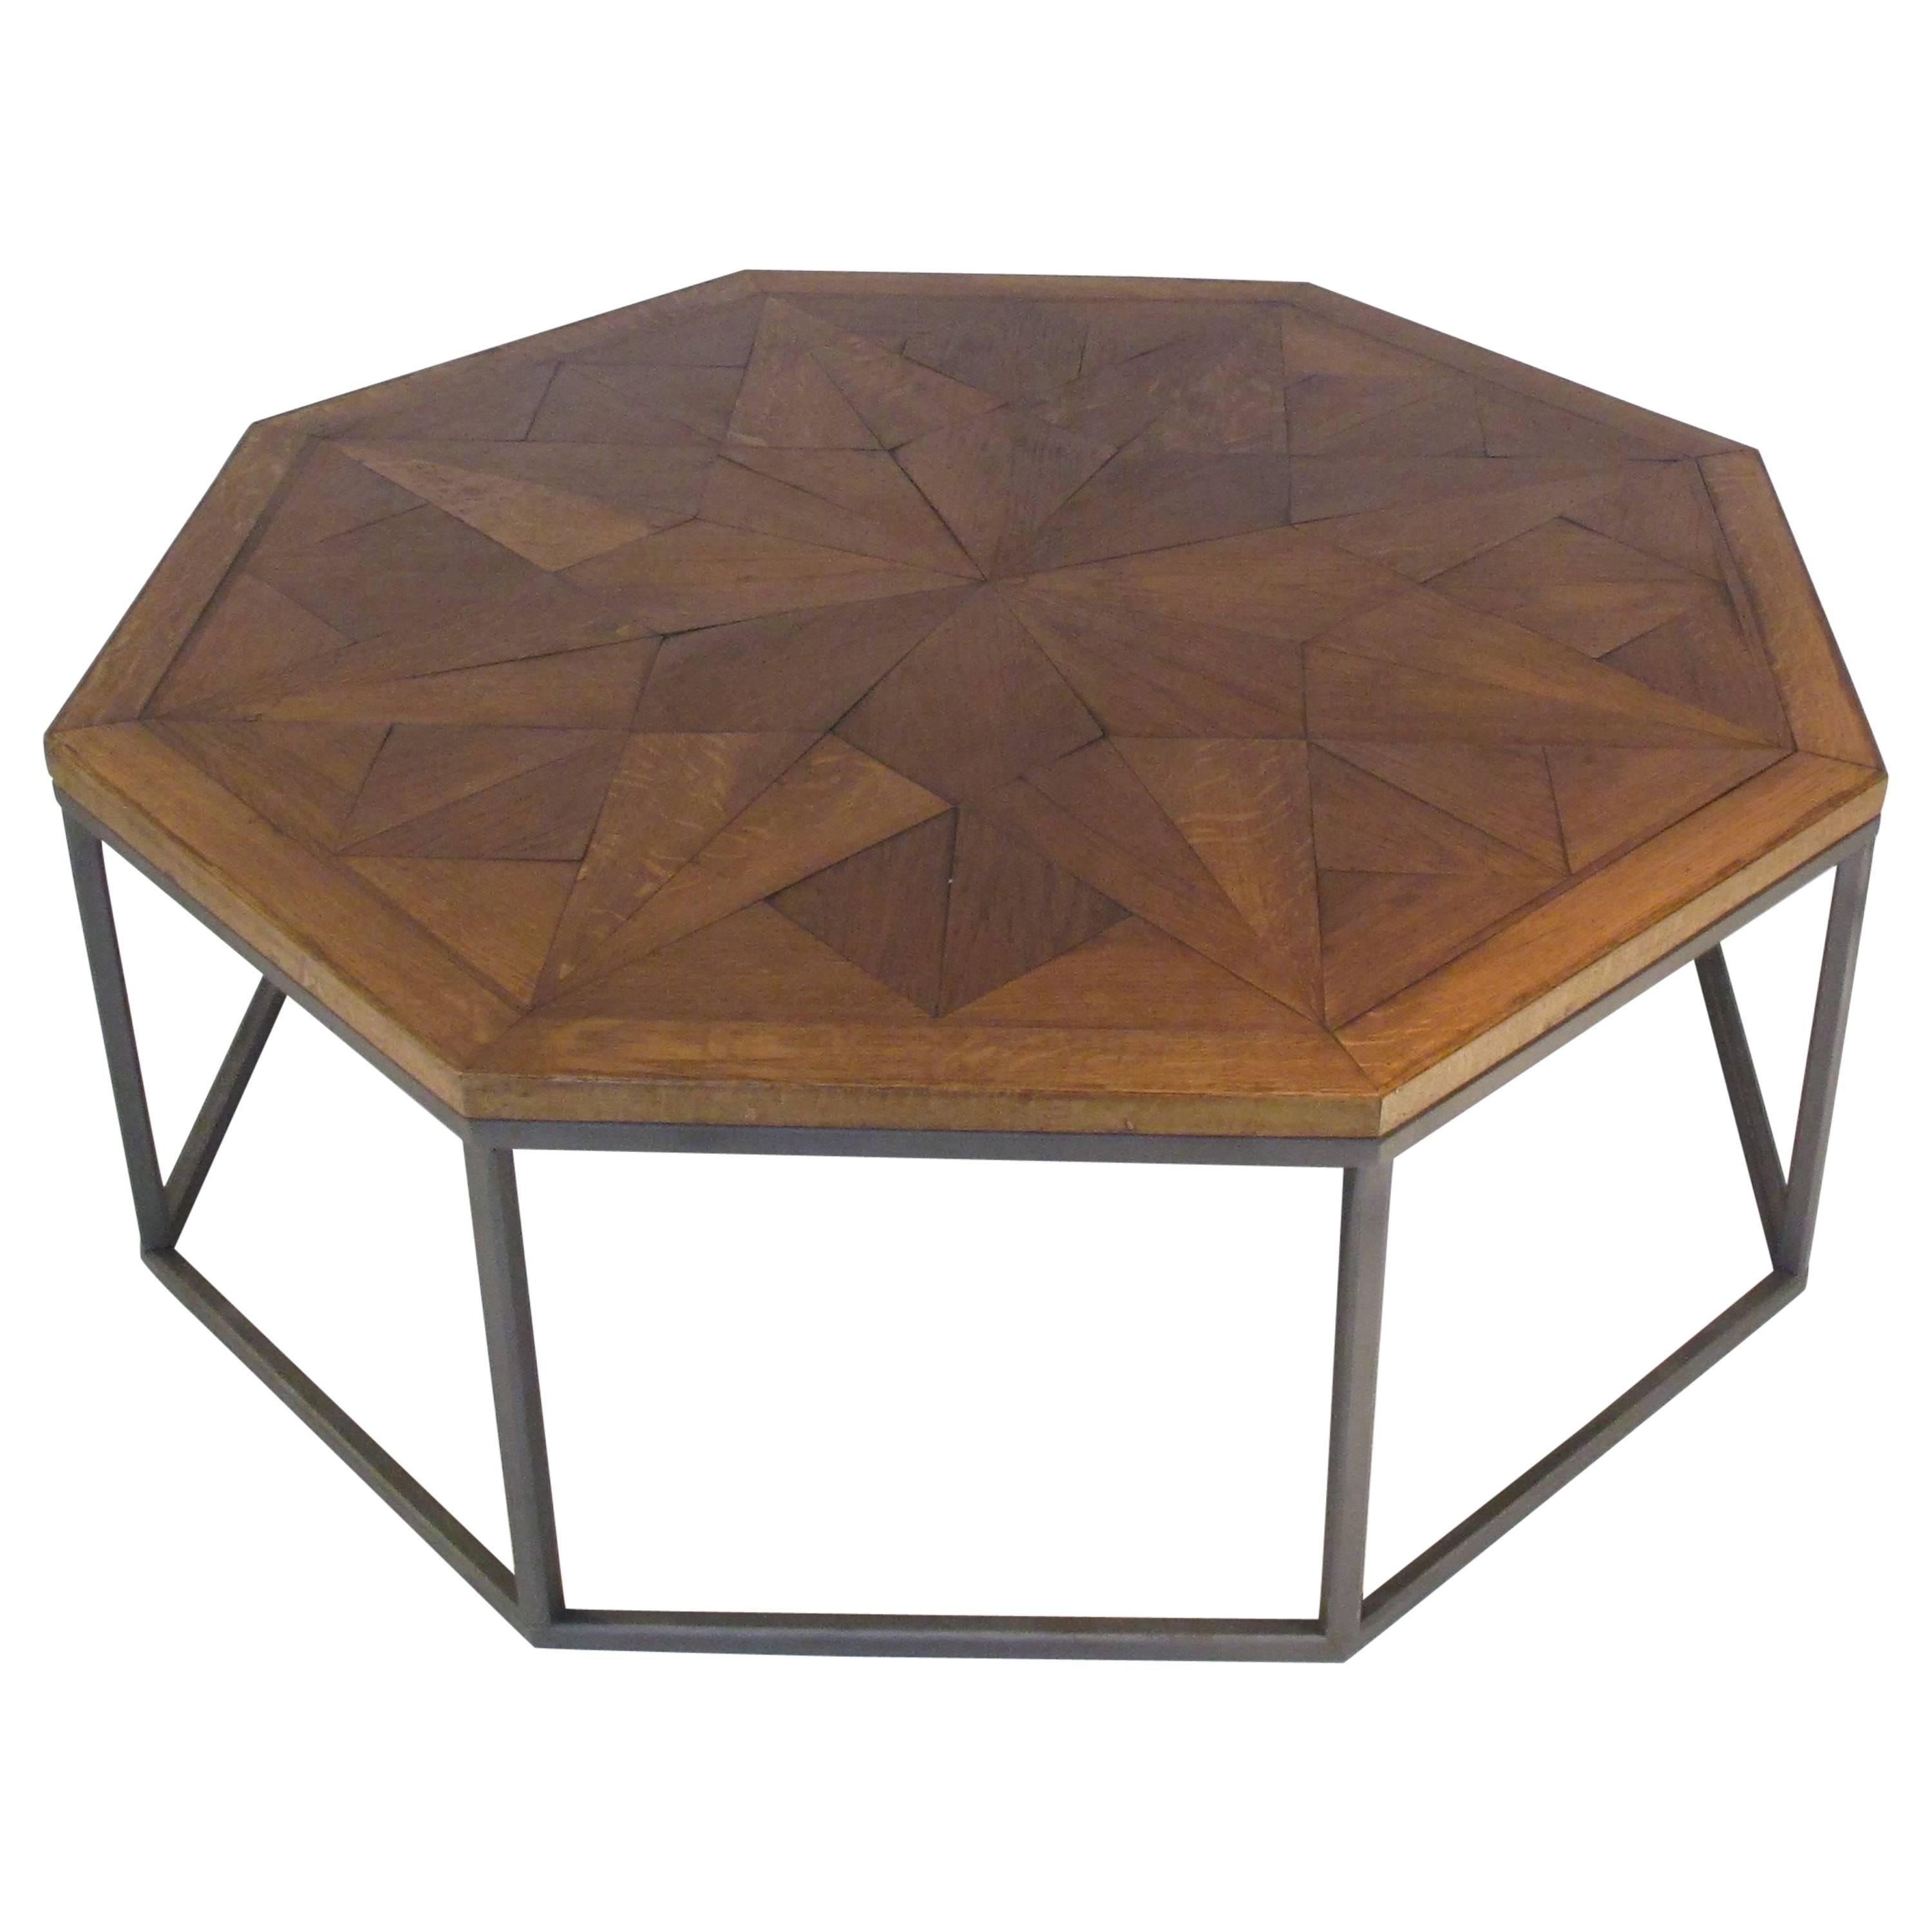 Bespoke Octagon Coffee Table with a 19th Century Oak Top